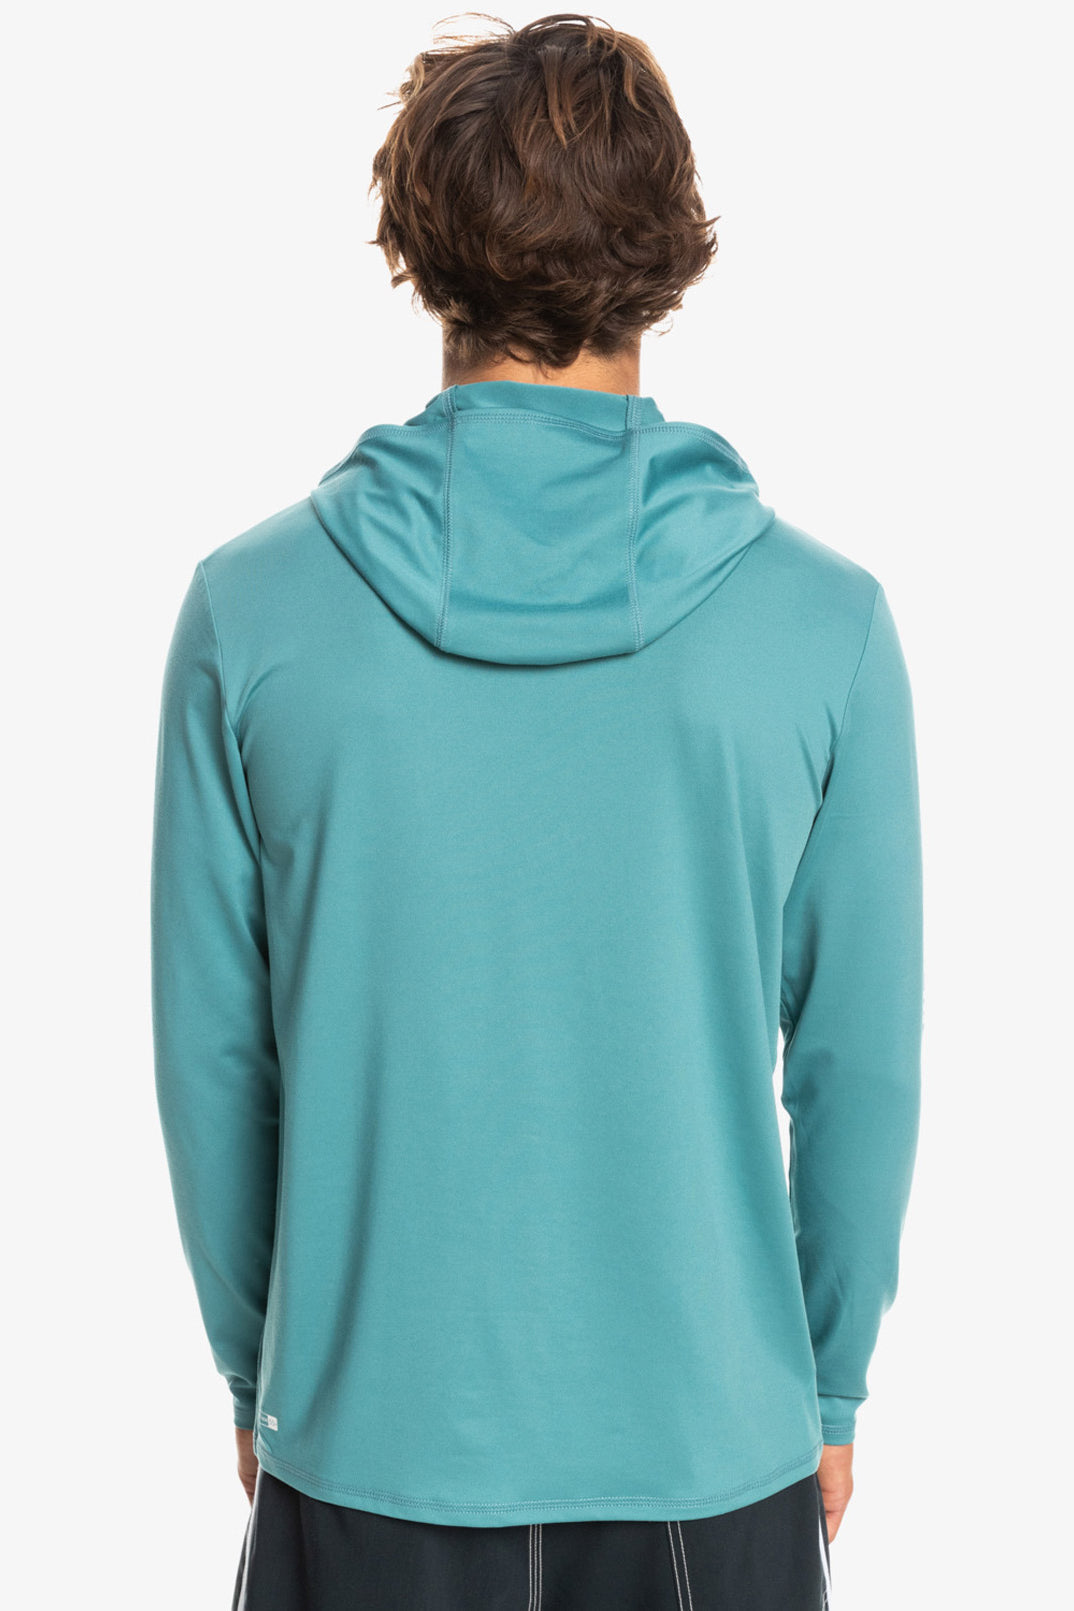 Quiksilver: Omni Session UPF 50 Long Sleeve Hooded Surf Tee